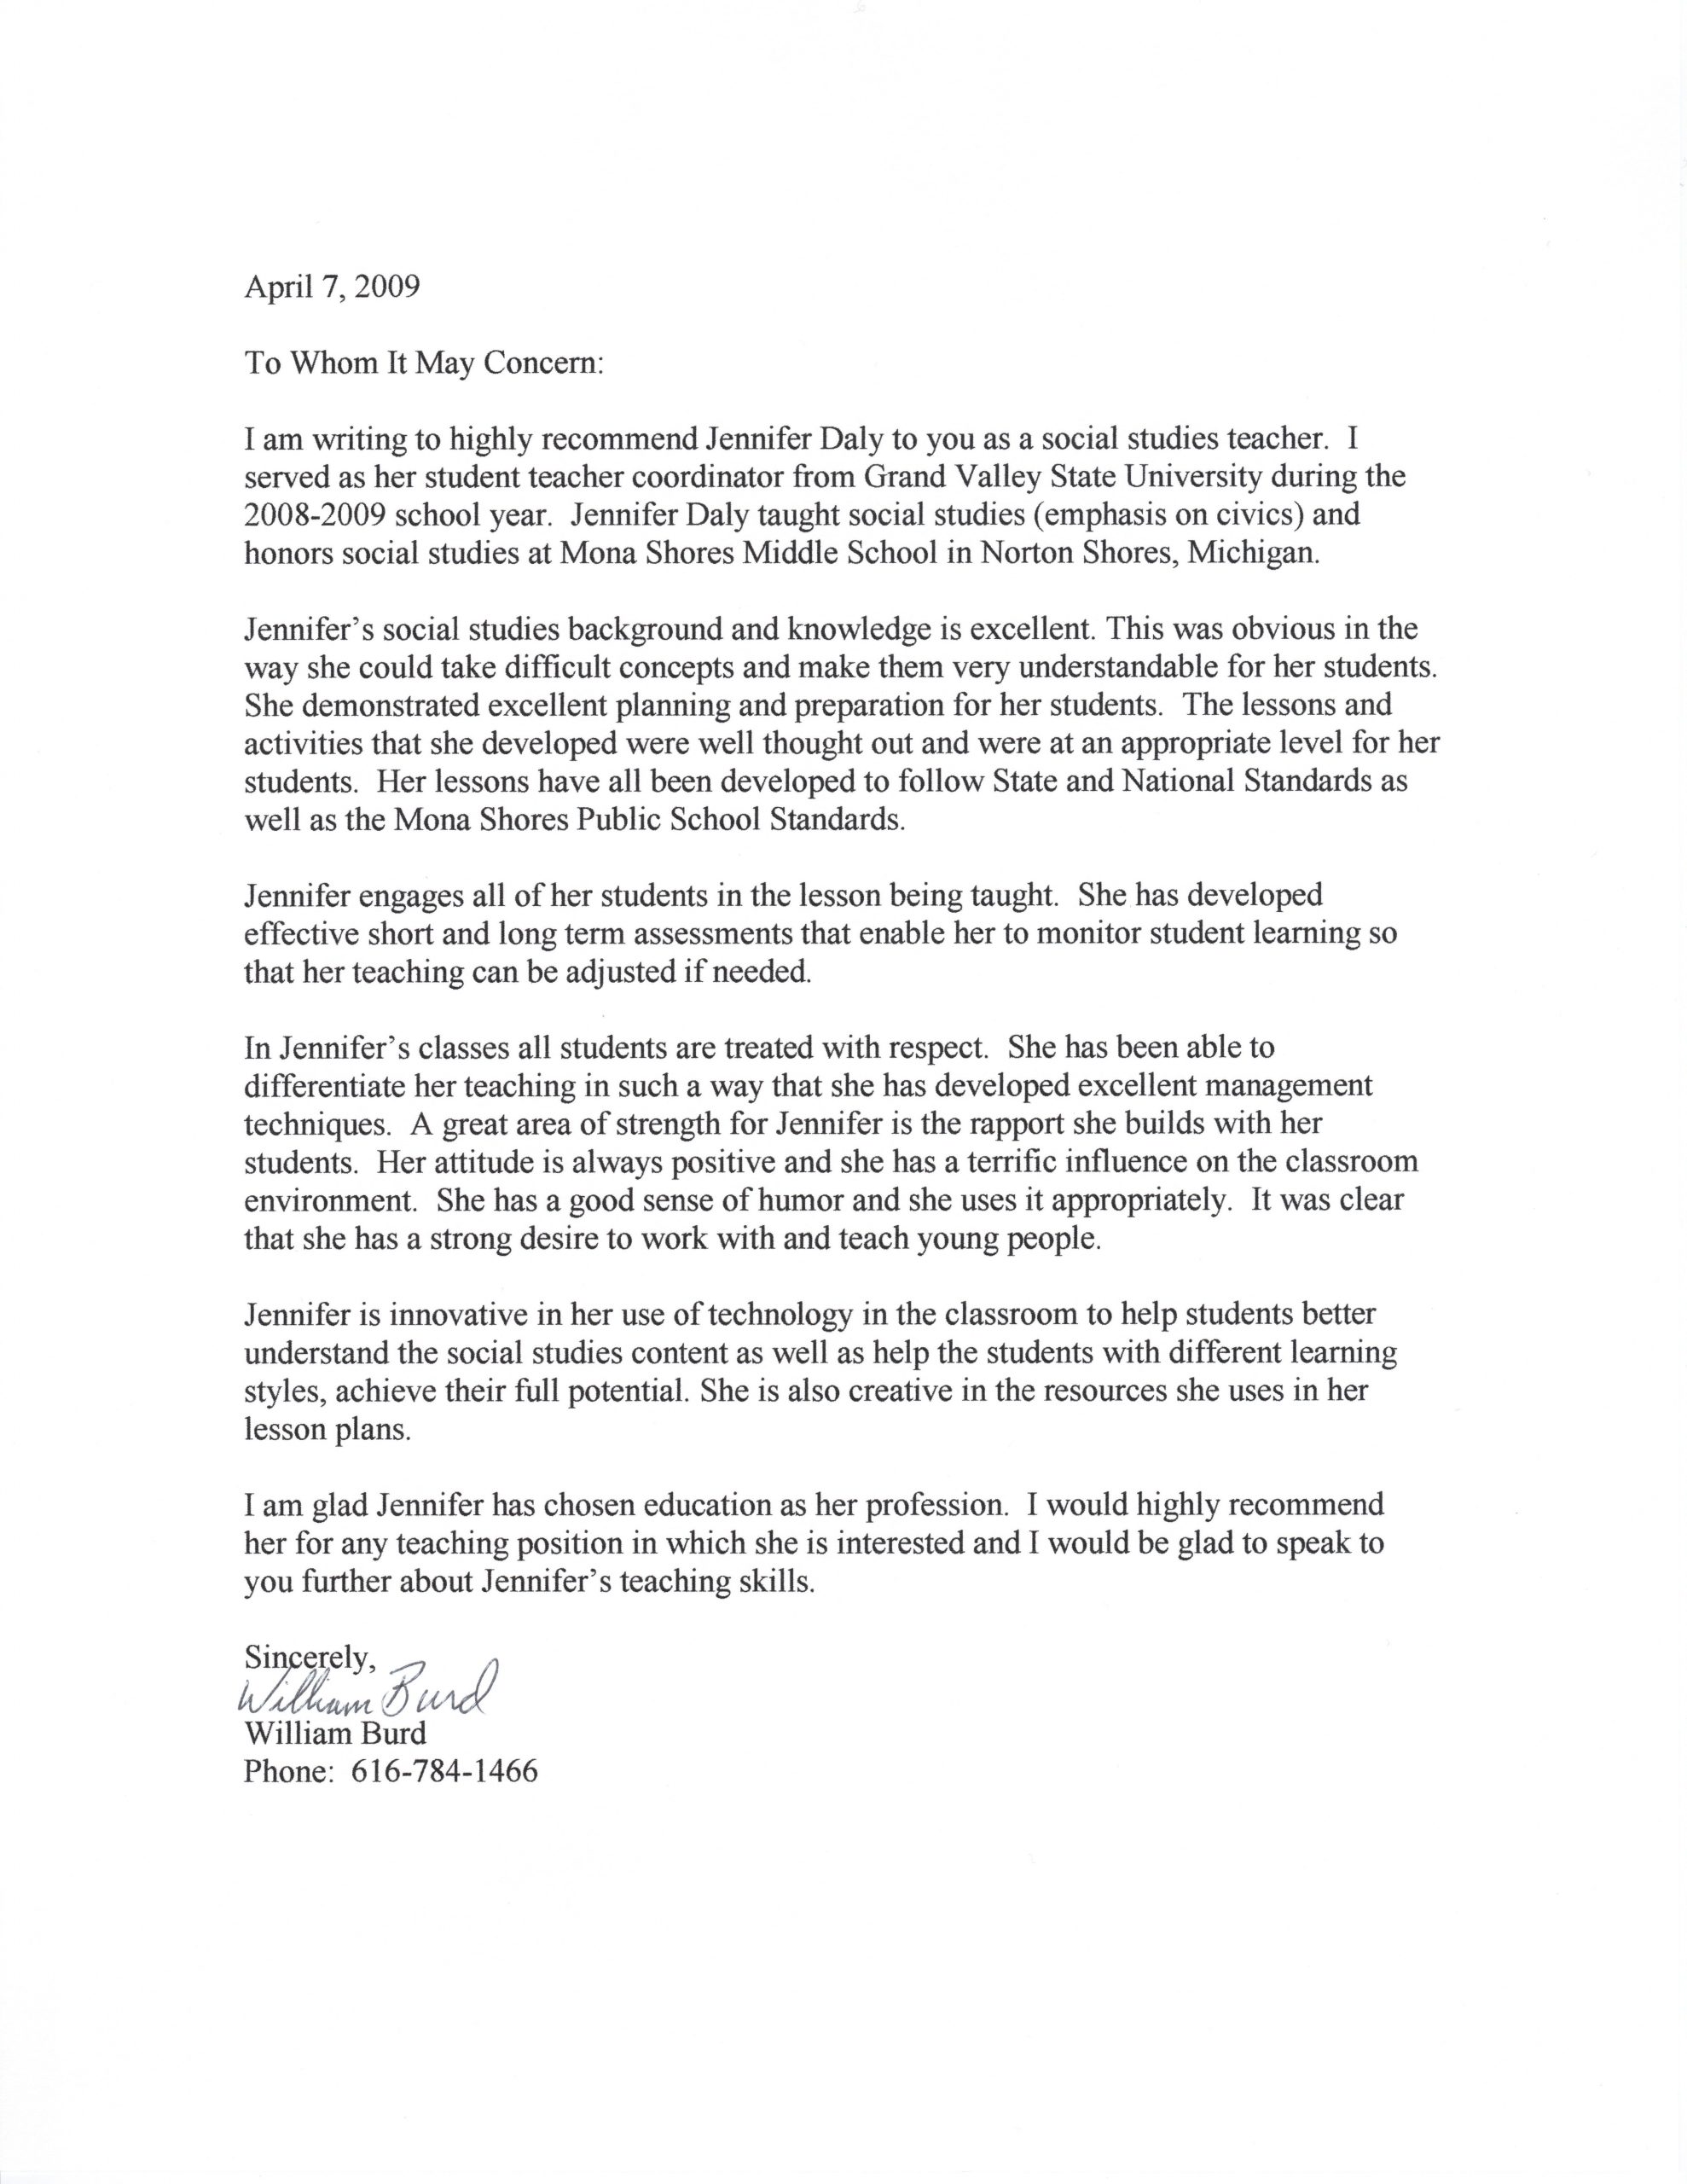 Student Teacher Recommendation Letter Examples Letter Of within size 5100 X 6600